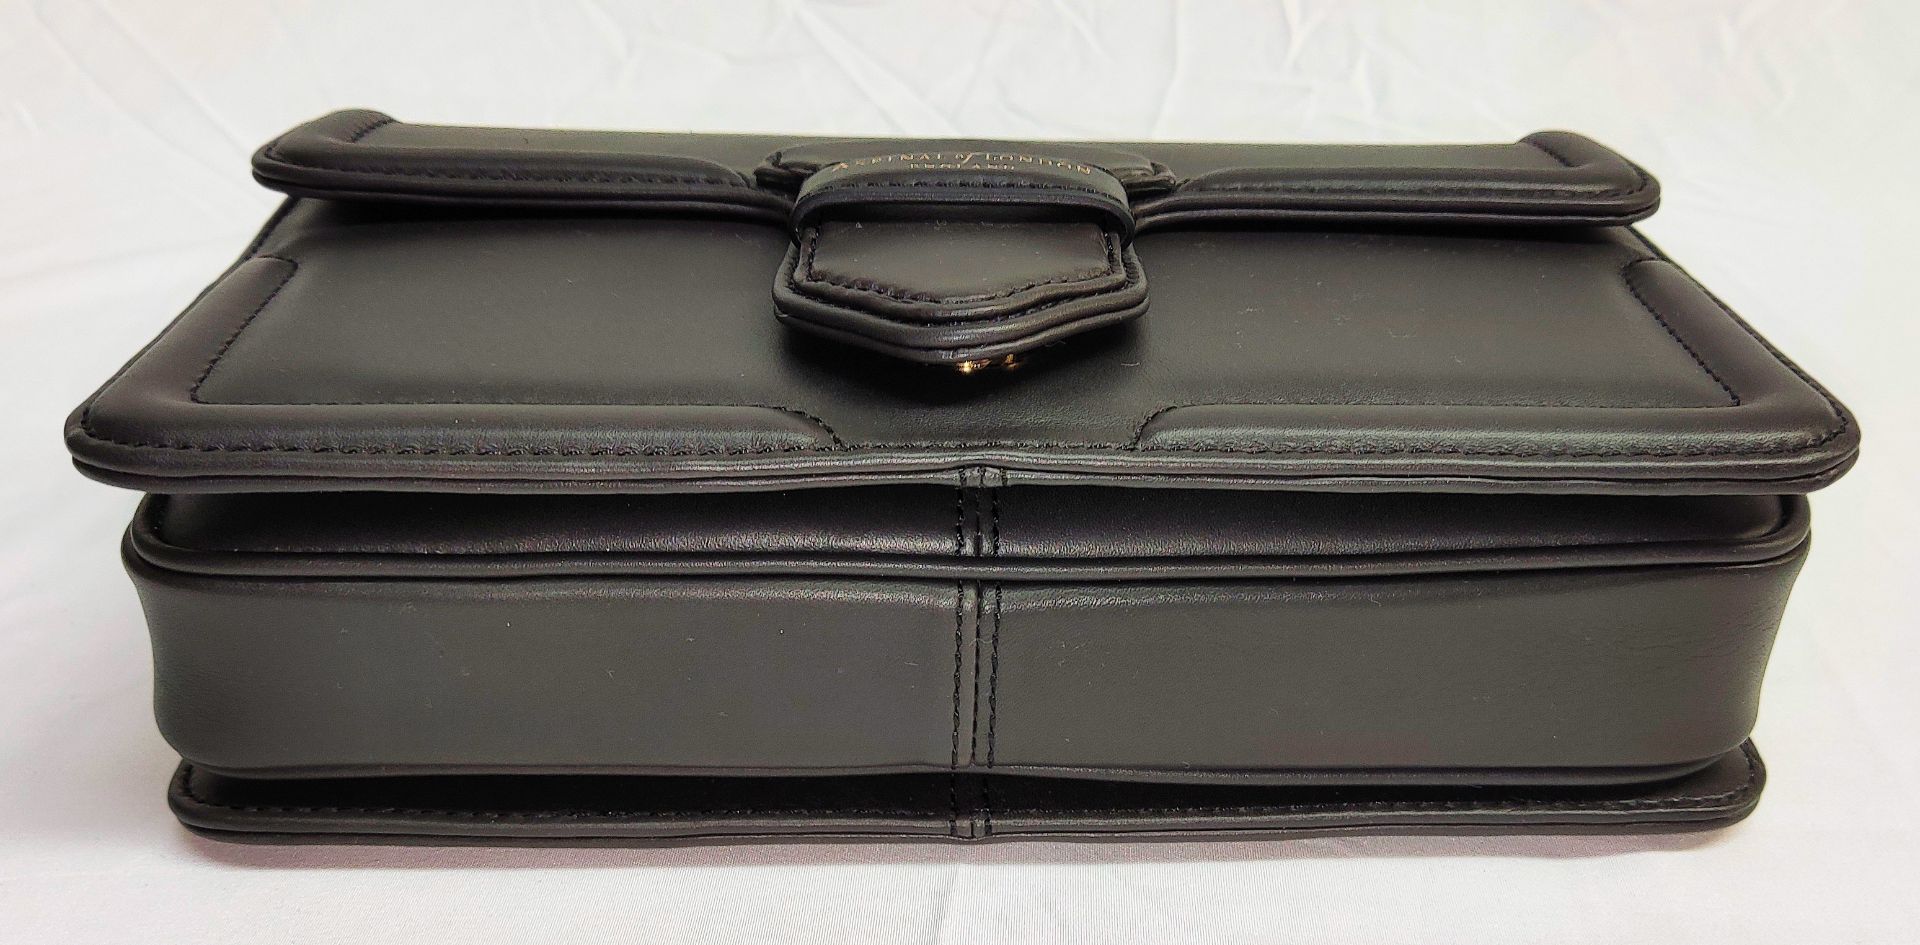 1 x ASPINAL OF LONDON The Resort Leather Bag In Smooth Black - Boxed - Original RRP £525 - Ref: - Image 20 of 24